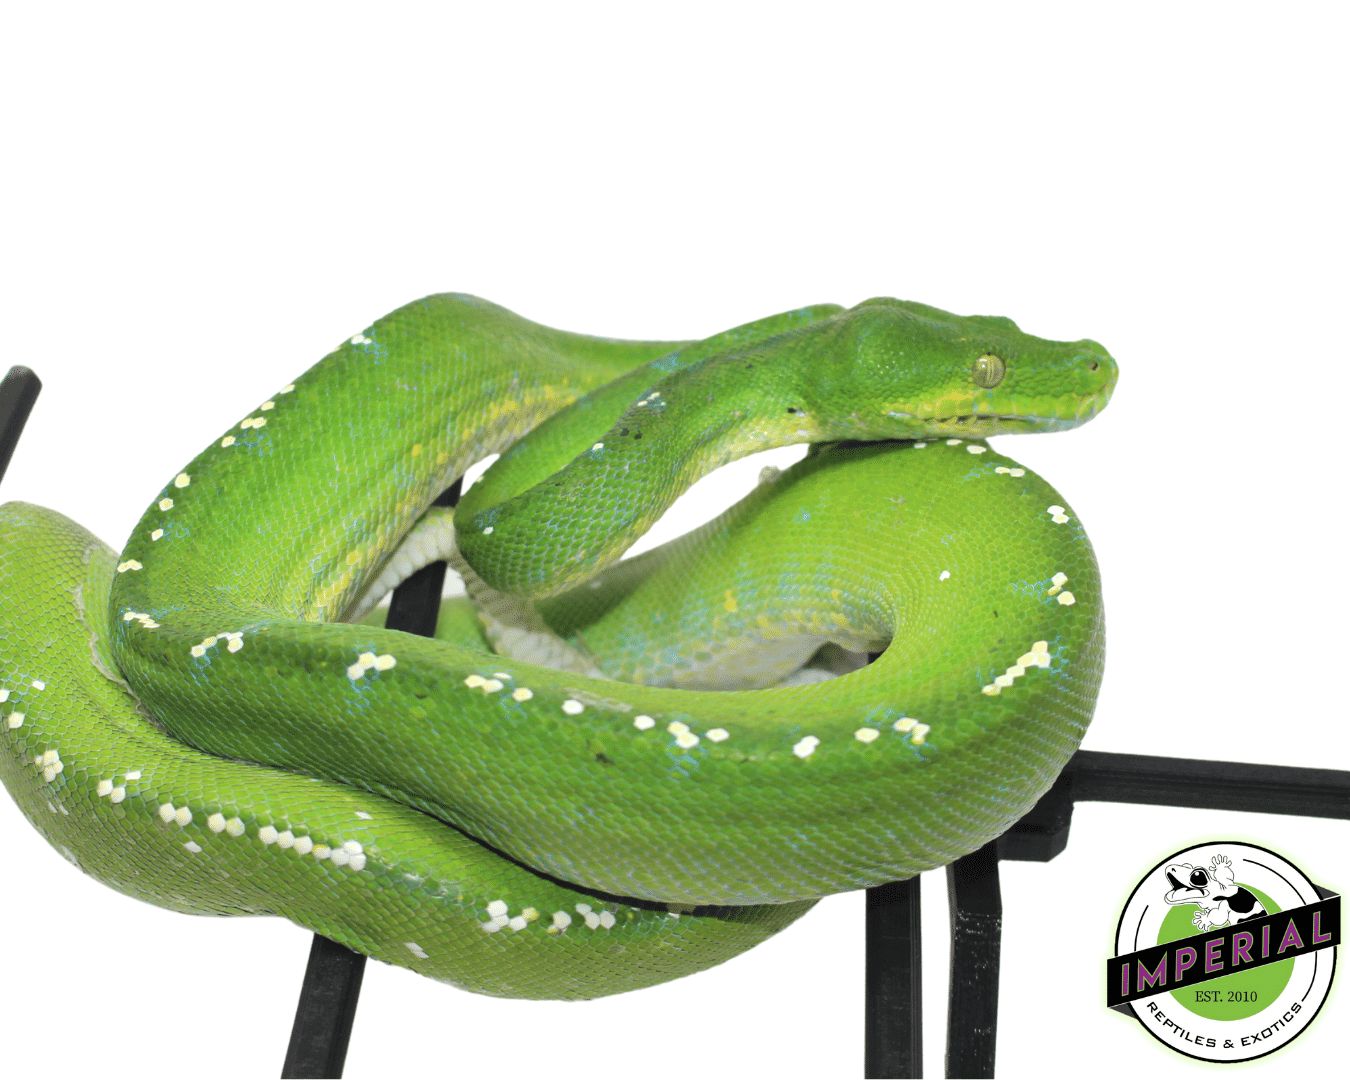 aru green tree python for sale, buy reptiles online